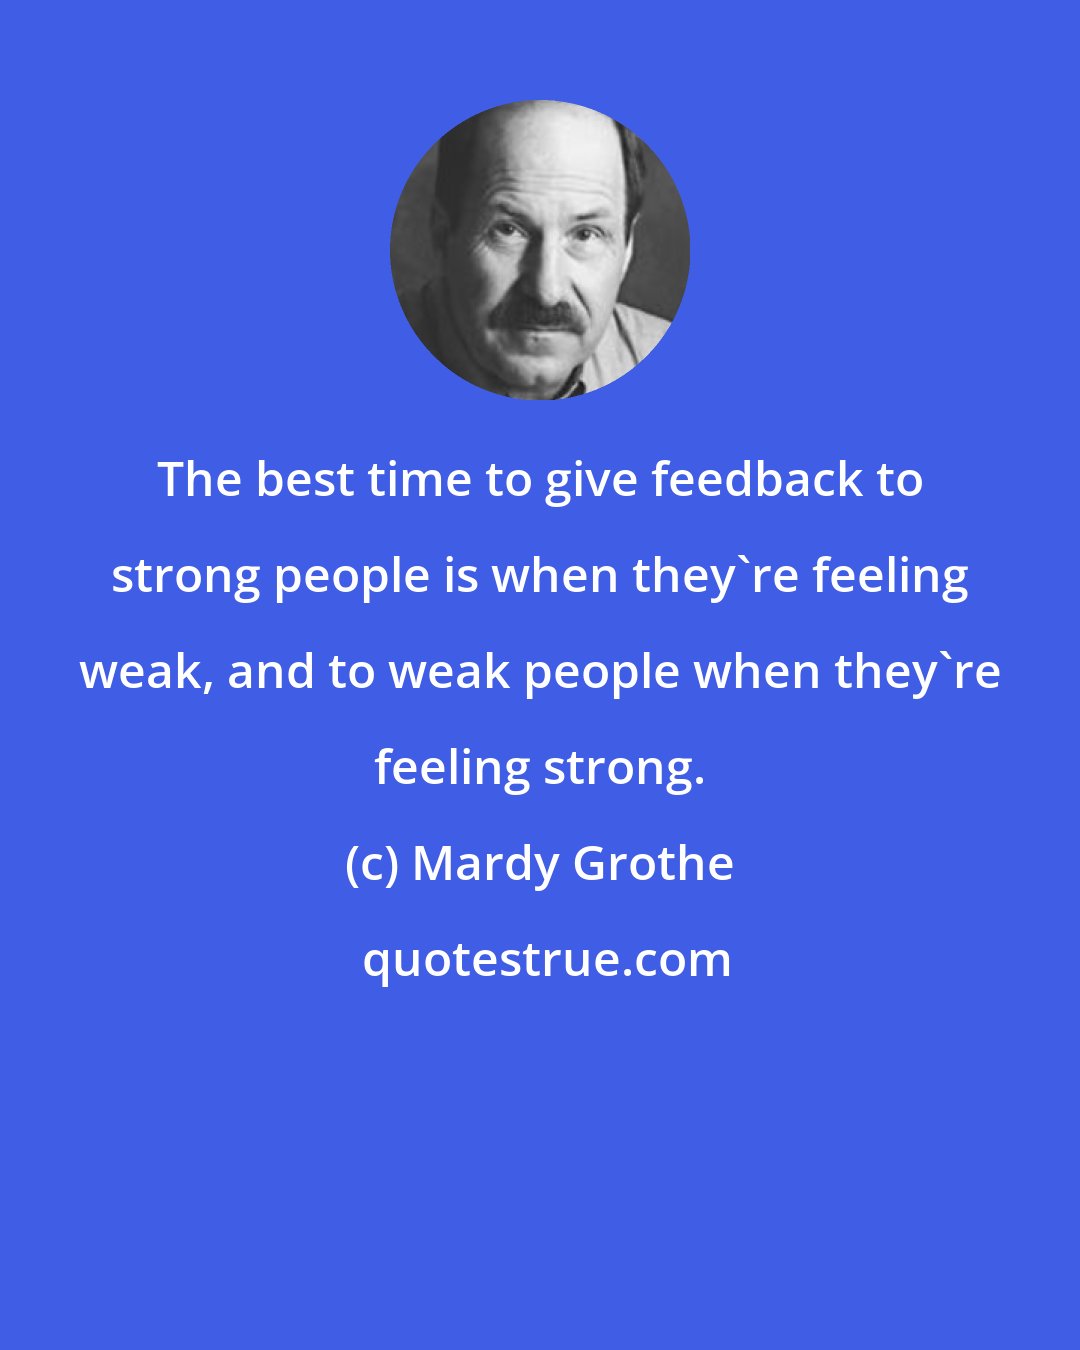 Mardy Grothe: The best time to give feedback to strong people is when they're feeling weak, and to weak people when they're feeling strong.